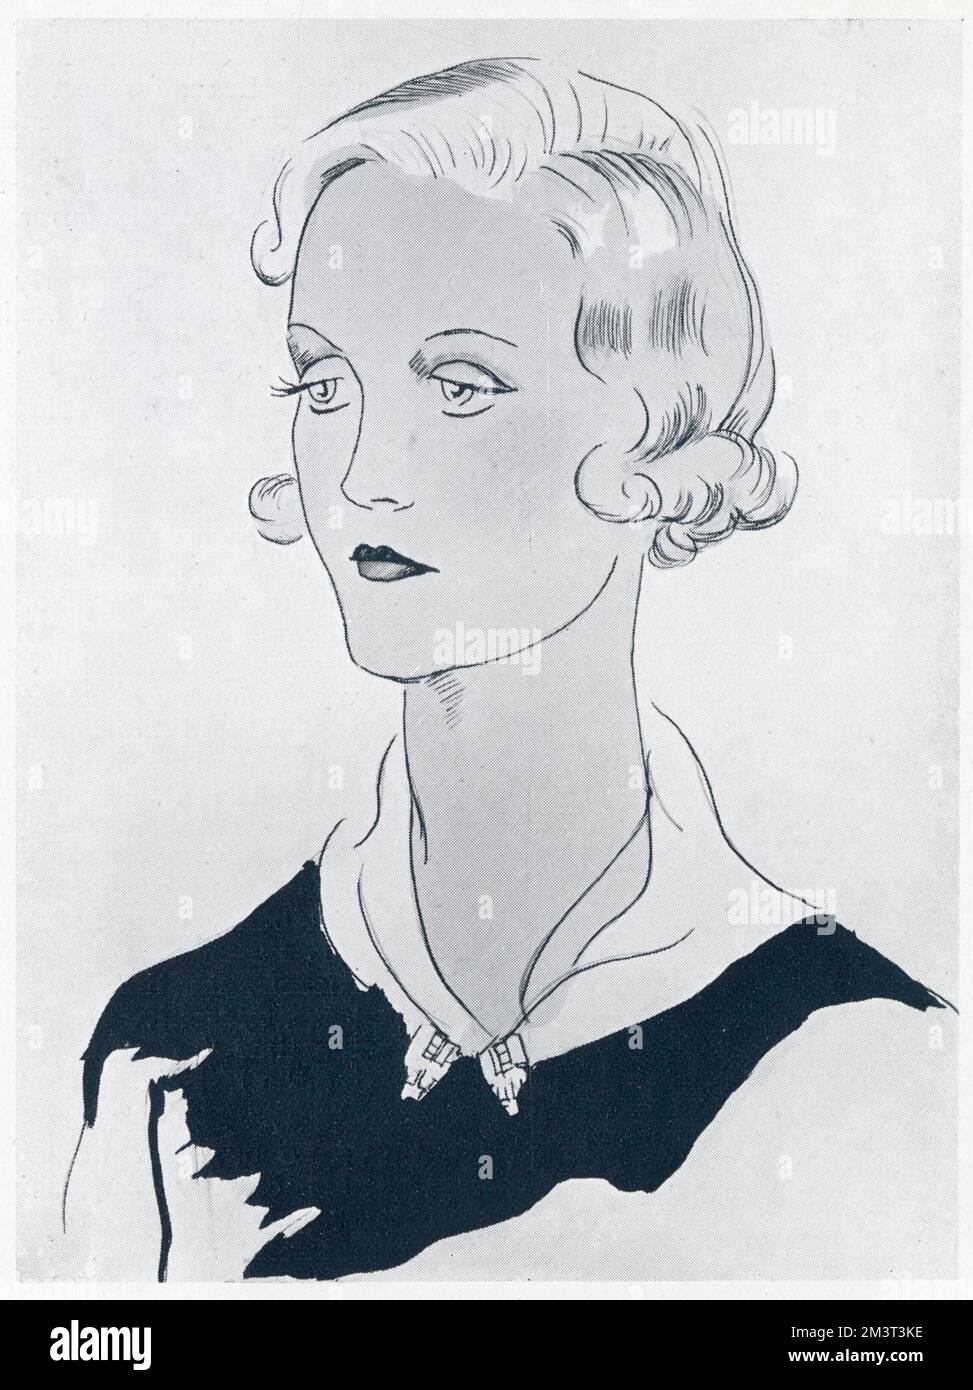 Mrs Bryan Guinness, formerly Diana Freeman Mitford (1910-2003), one of the notorious Mitford sisters and society beauty drawn by Molly Bishop. Left Bryan Guinness for Oswald Mosley. Imprisoned during WWII for being fascist sympathisers. Never repented her views. Stock Photo